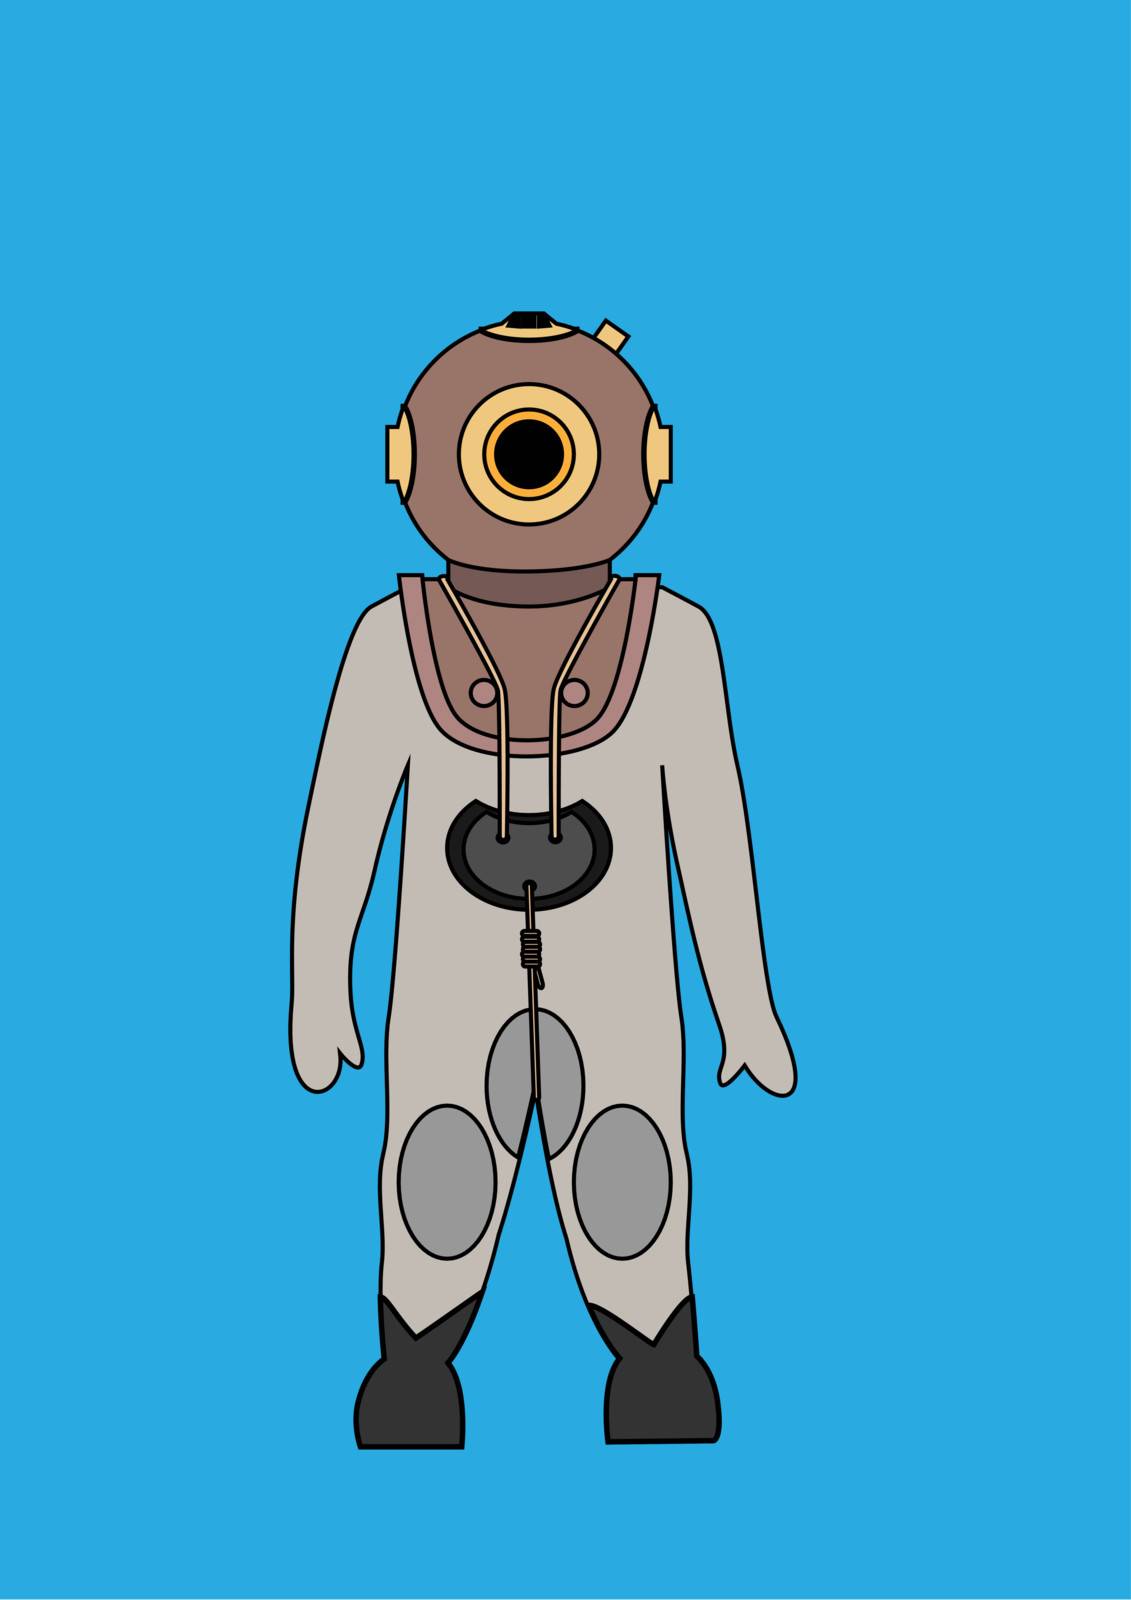 vector illustration of a diver in an old diving suit